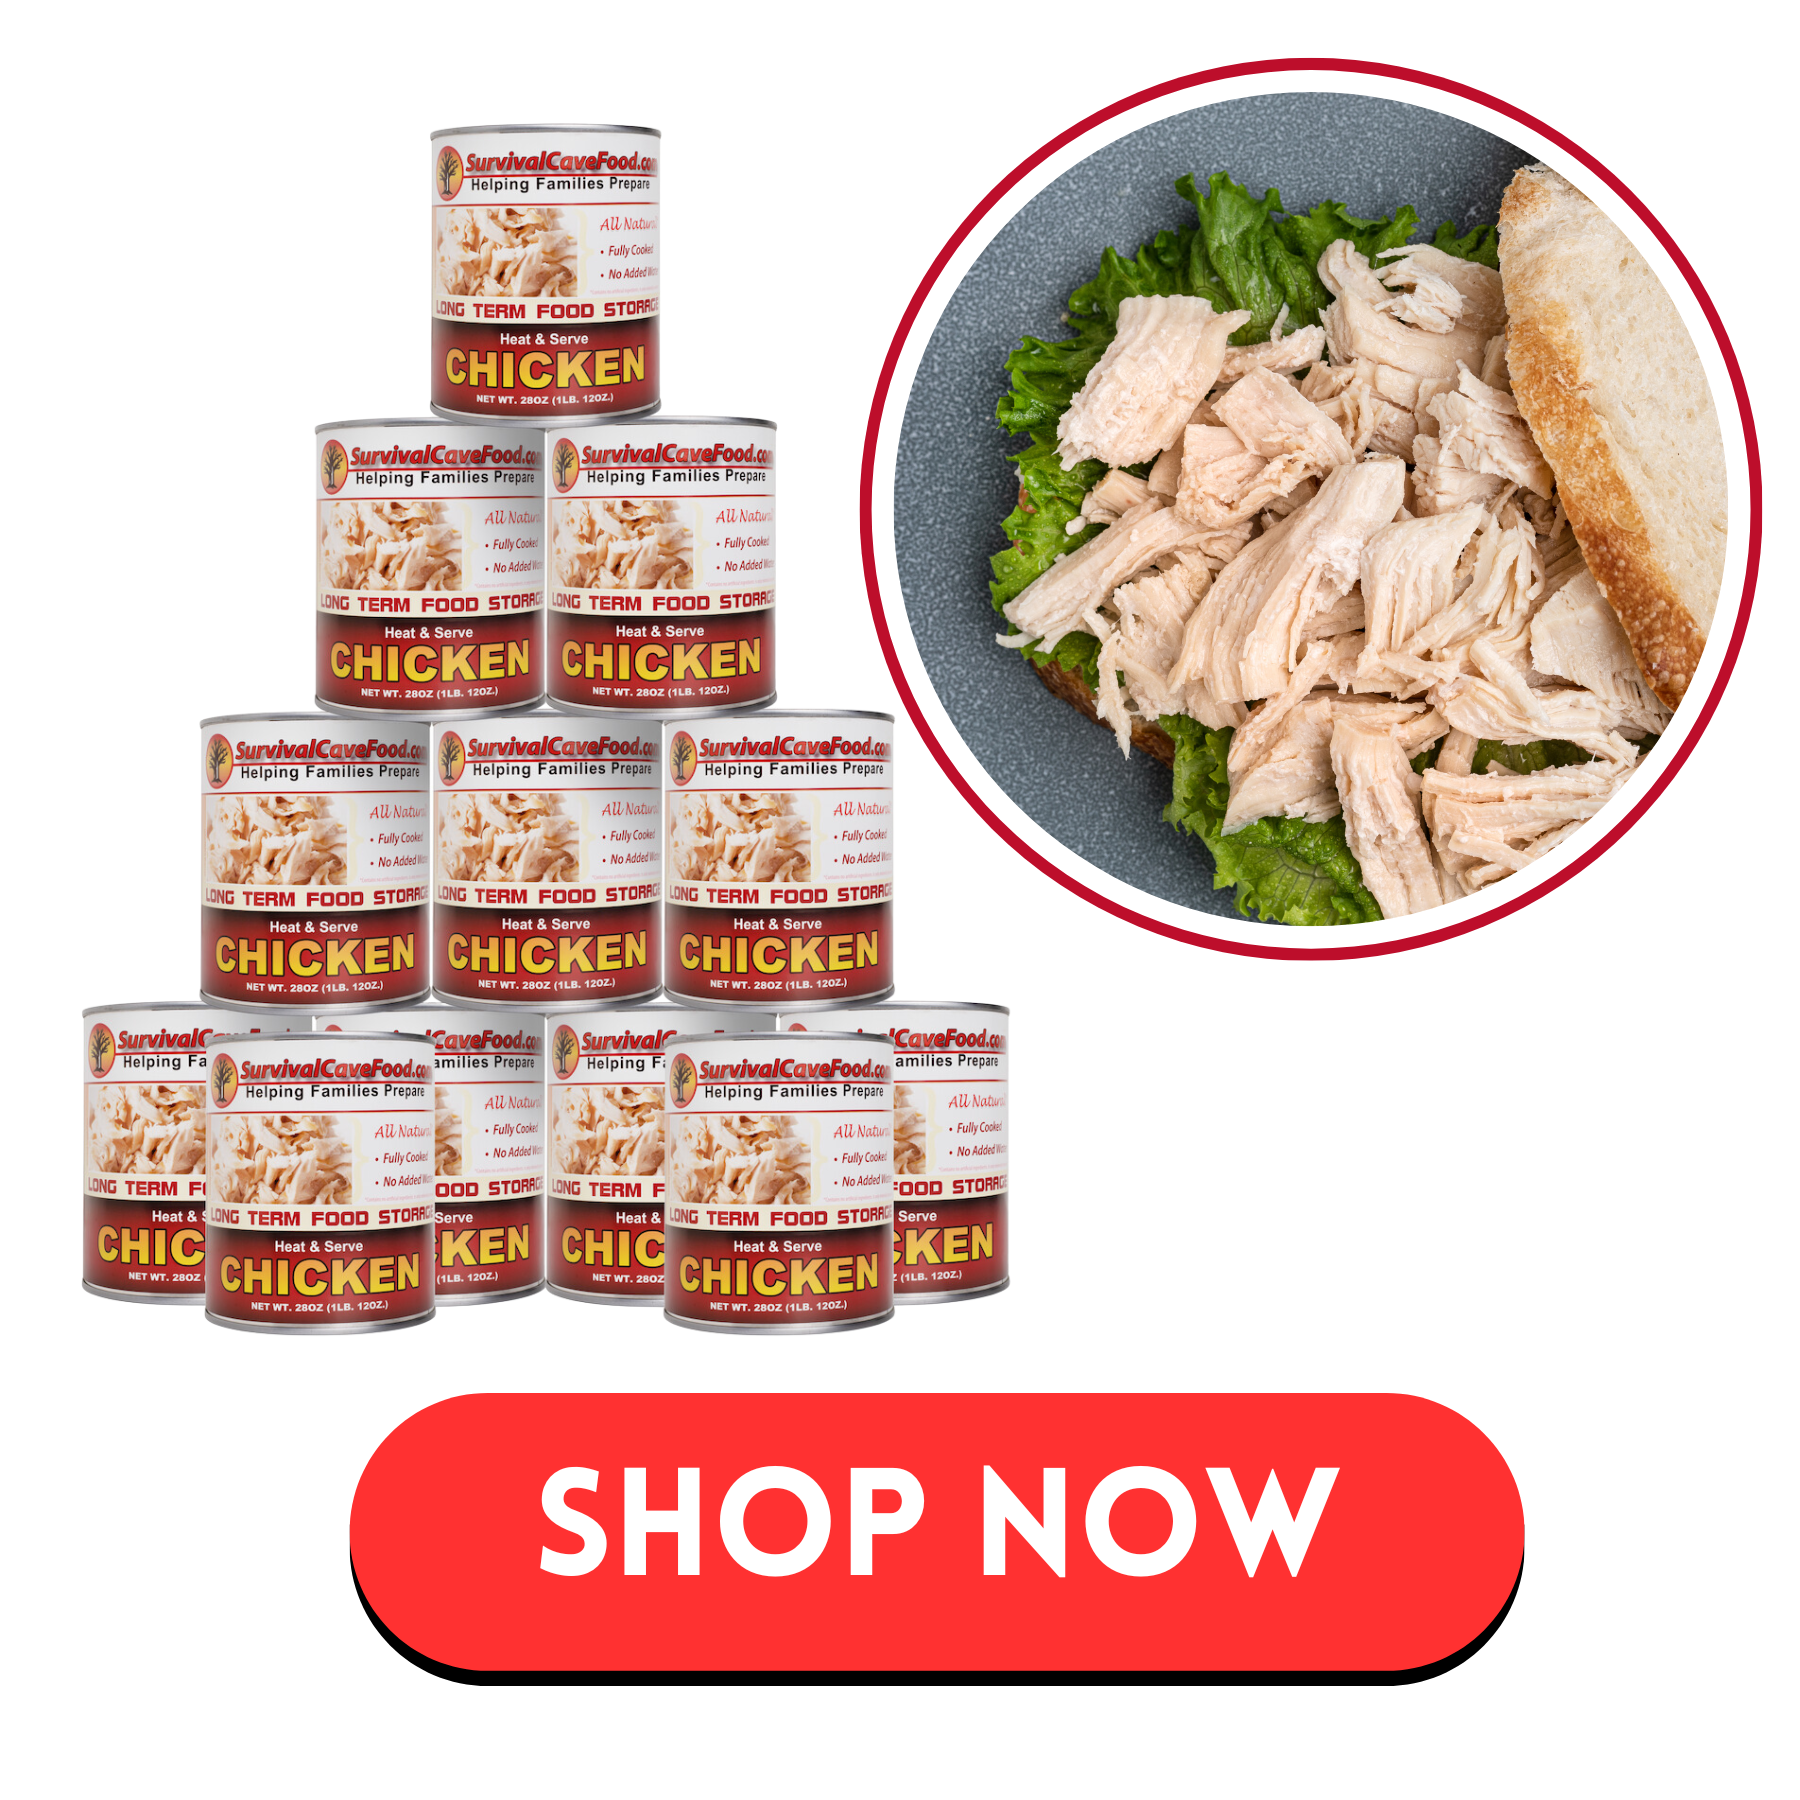 survival cave food canned chicken meat